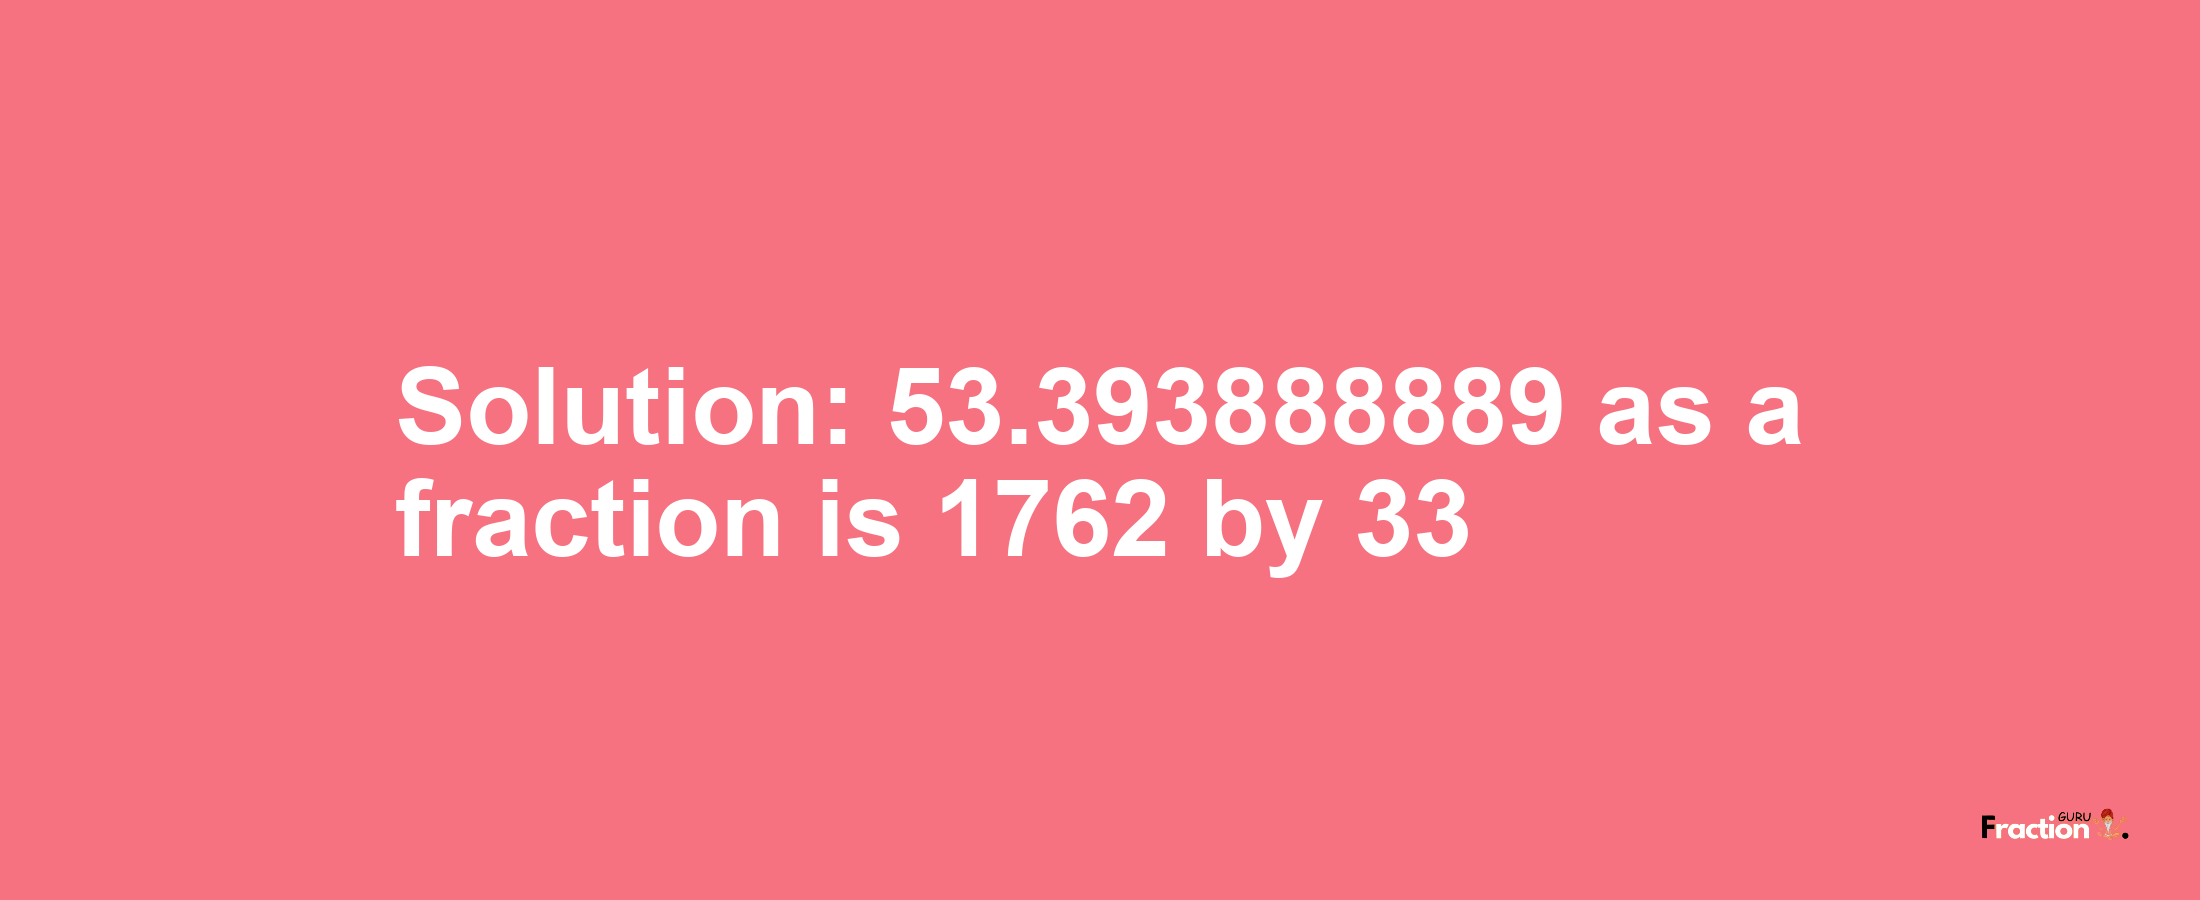 Solution:53.393888889 as a fraction is 1762/33